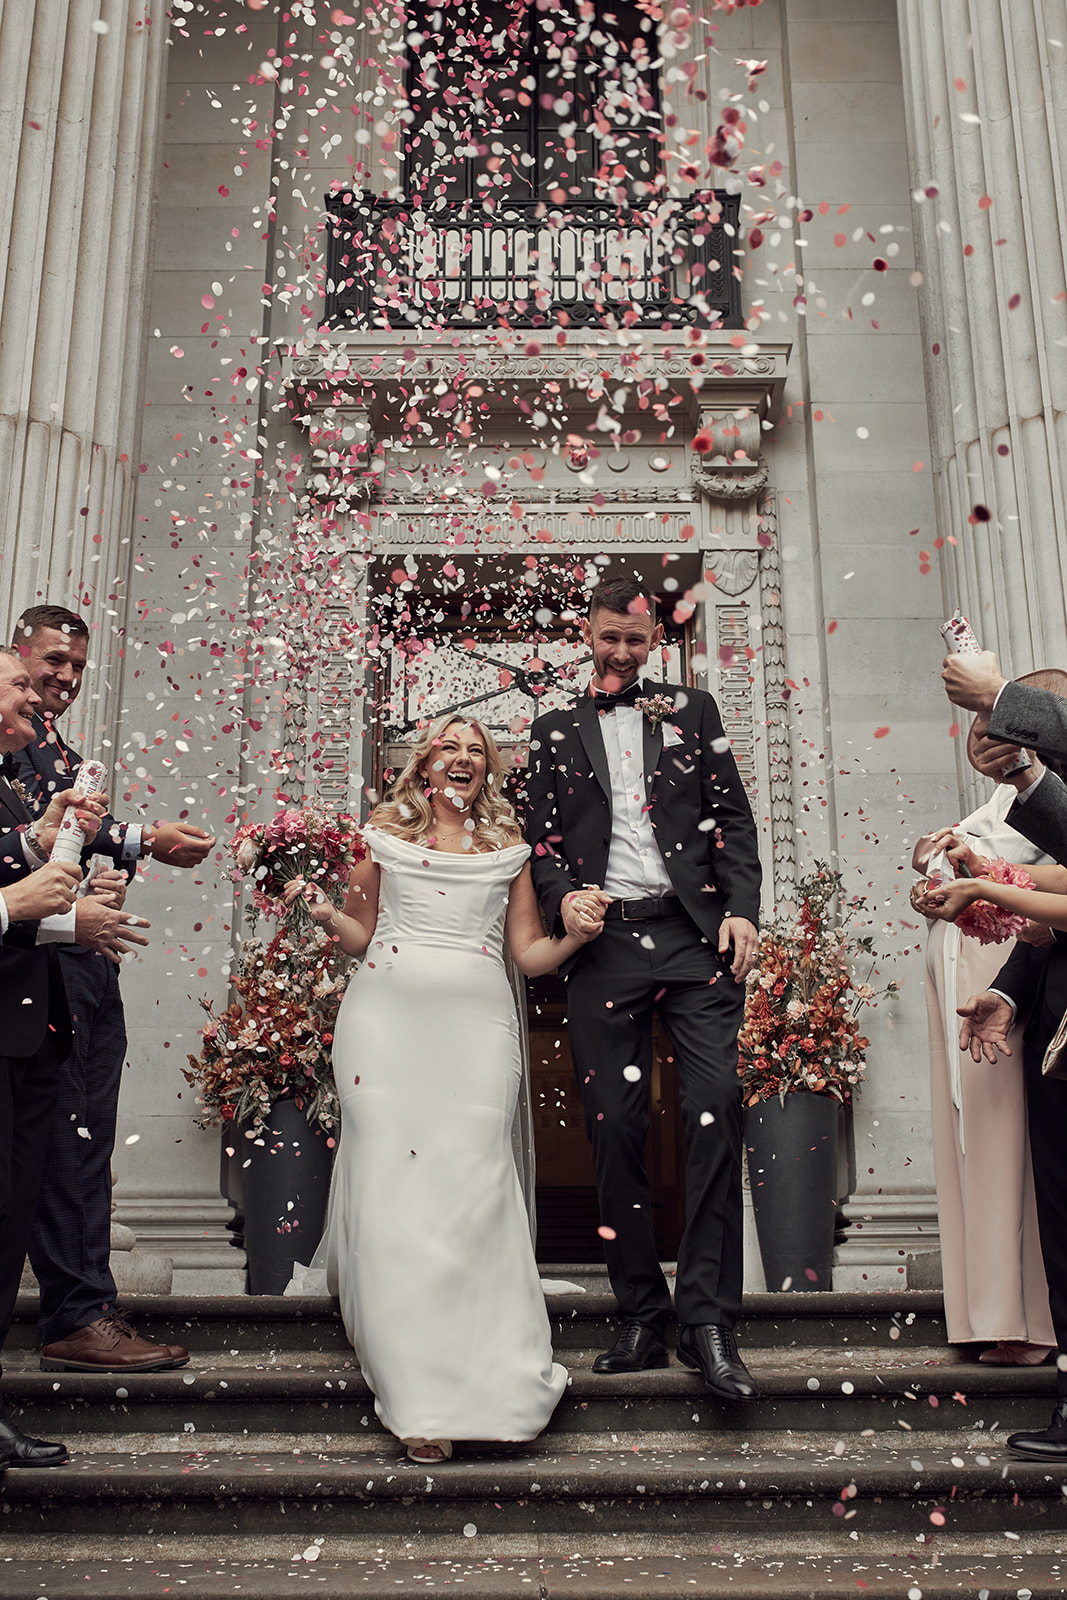 Katy and Max welcomed with confetti toss at  Marylebone Town Hall